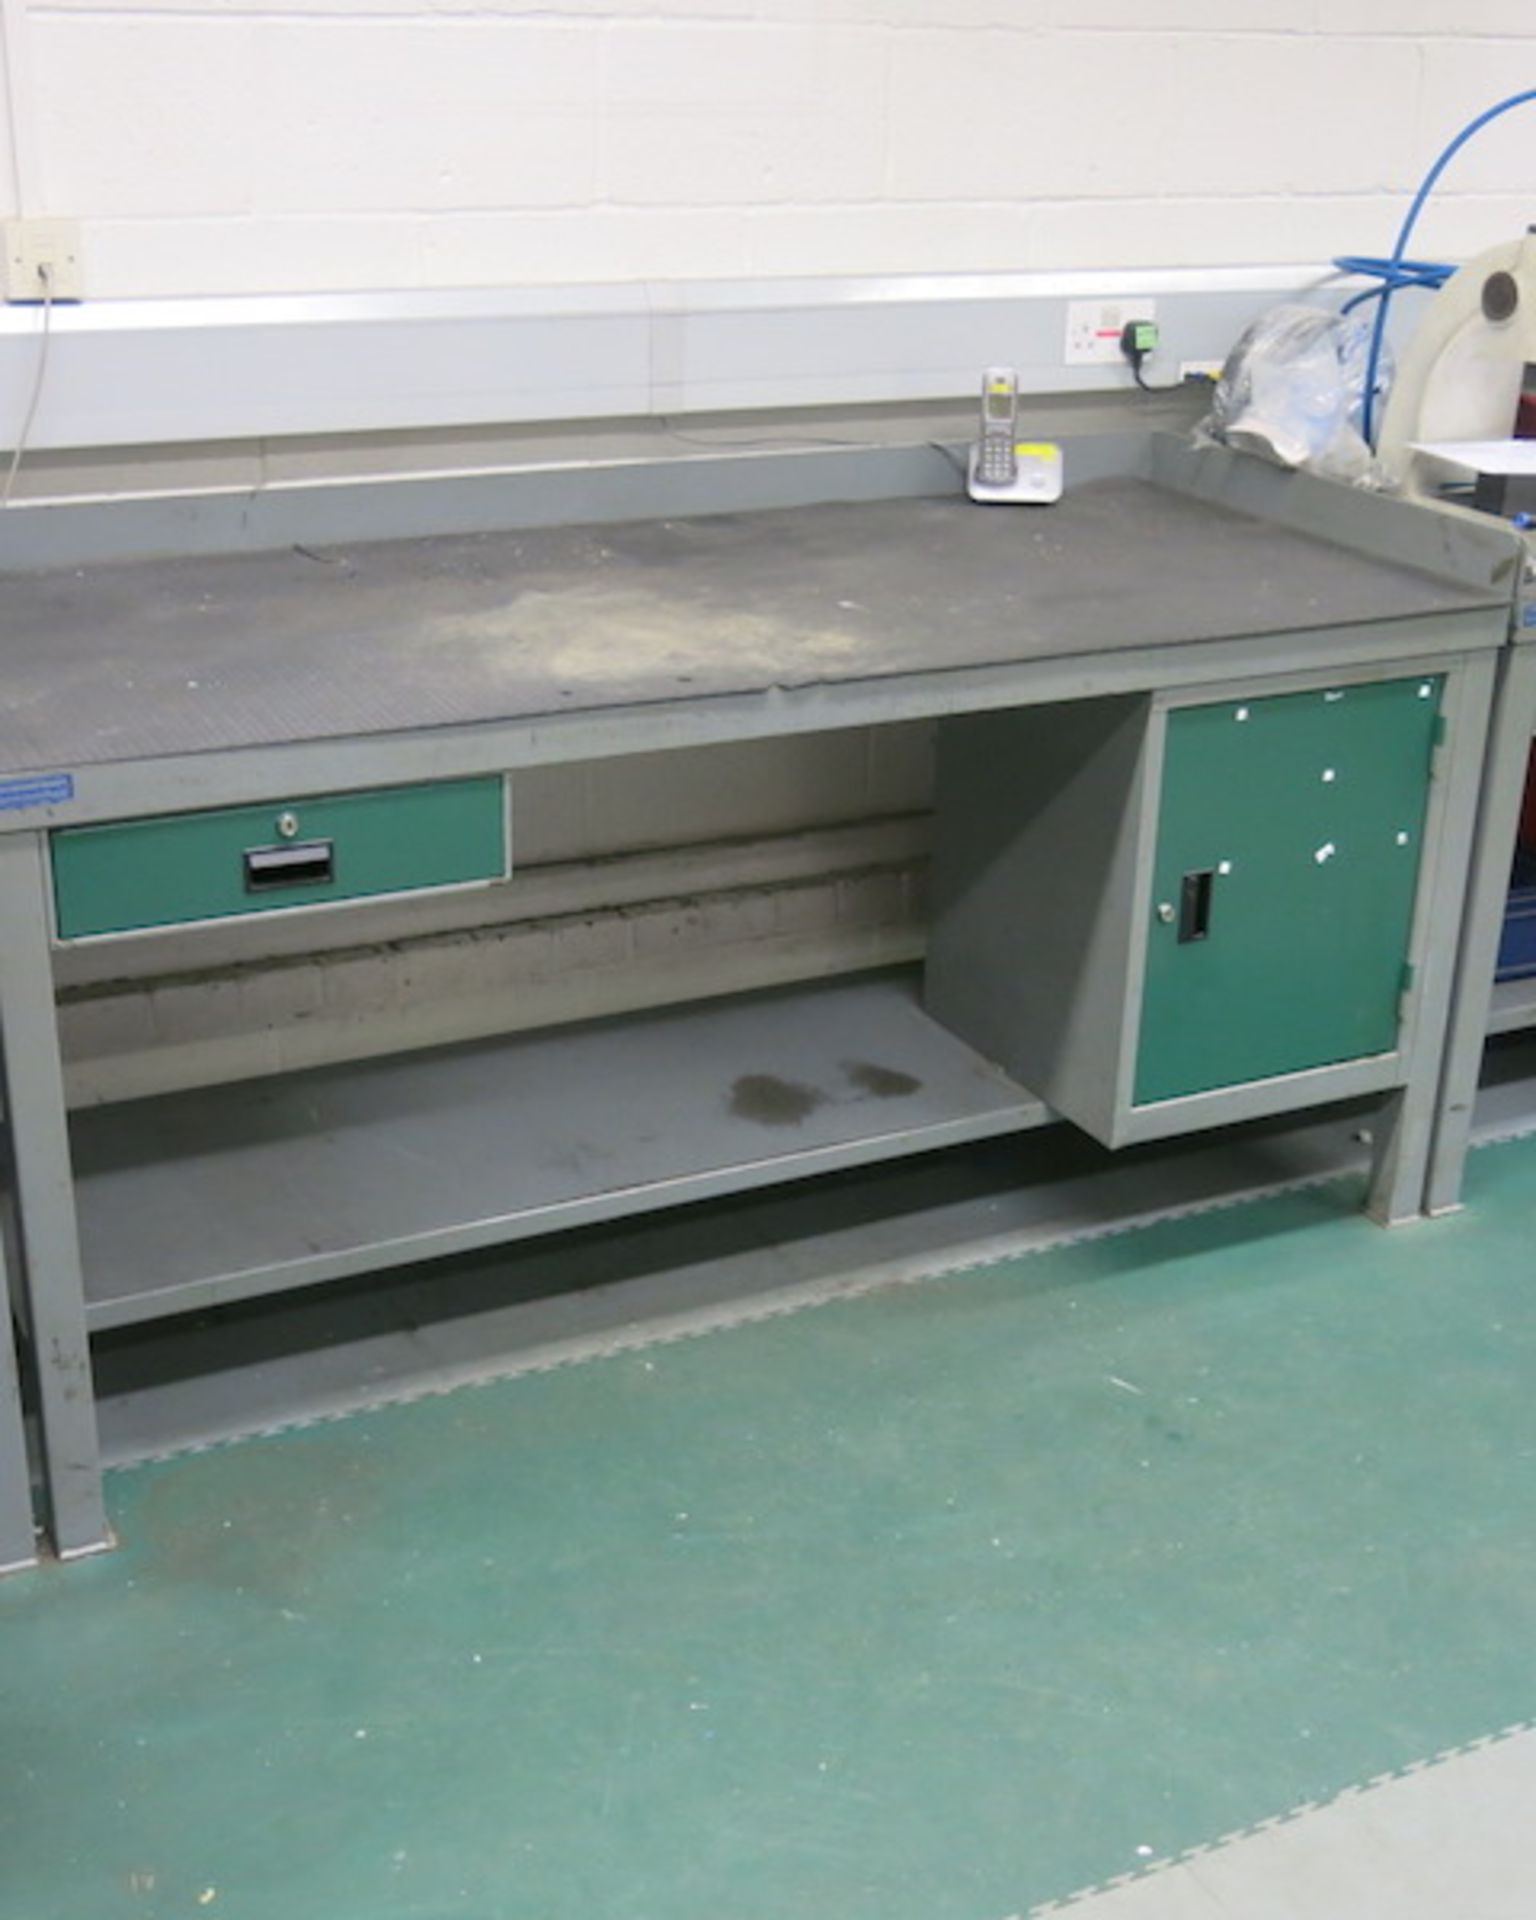 Welconstruct Metal Workbench with Lockable Drawer & Cupboard. Size 1.8m x 76cm with Shelf Under. - Image 2 of 5